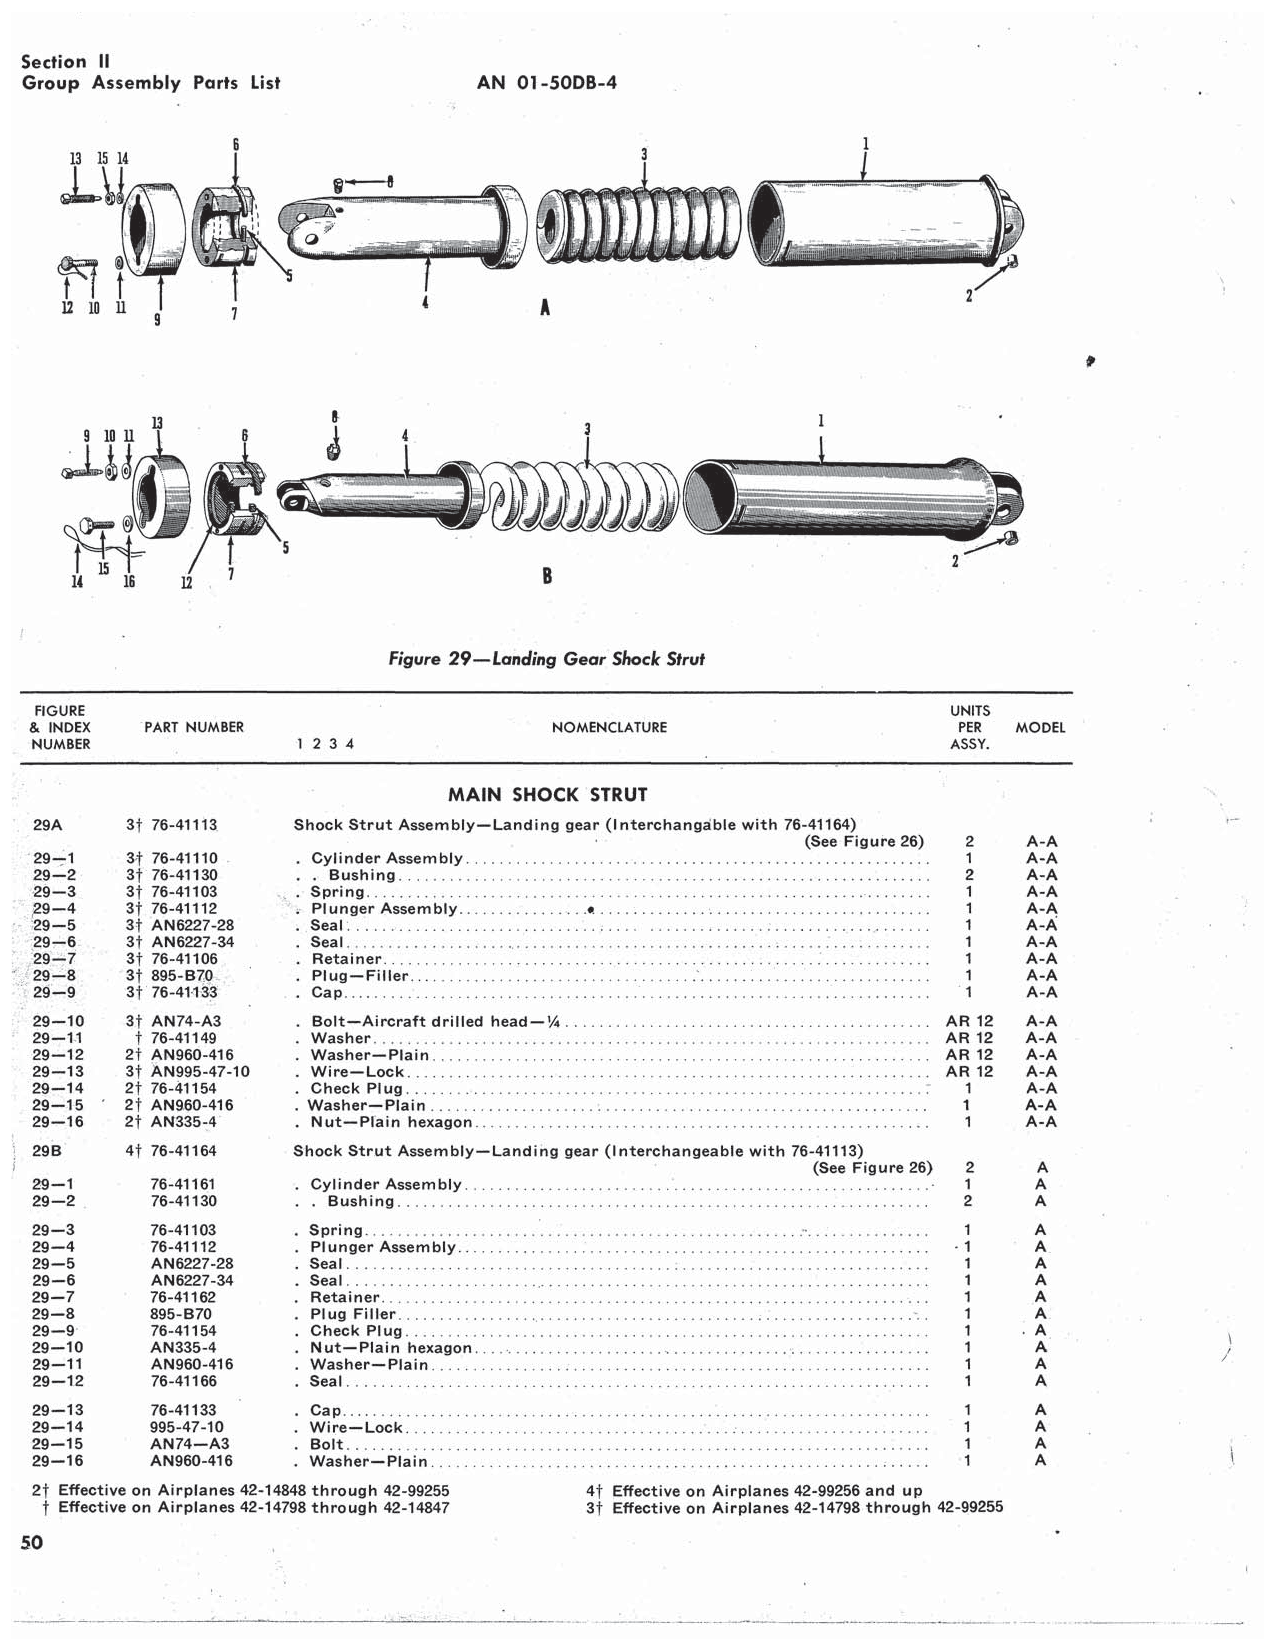 Sample page 54 from AirCorps Library document: Illustrated Parts Breakdown - L-5, OY-1, OY-2